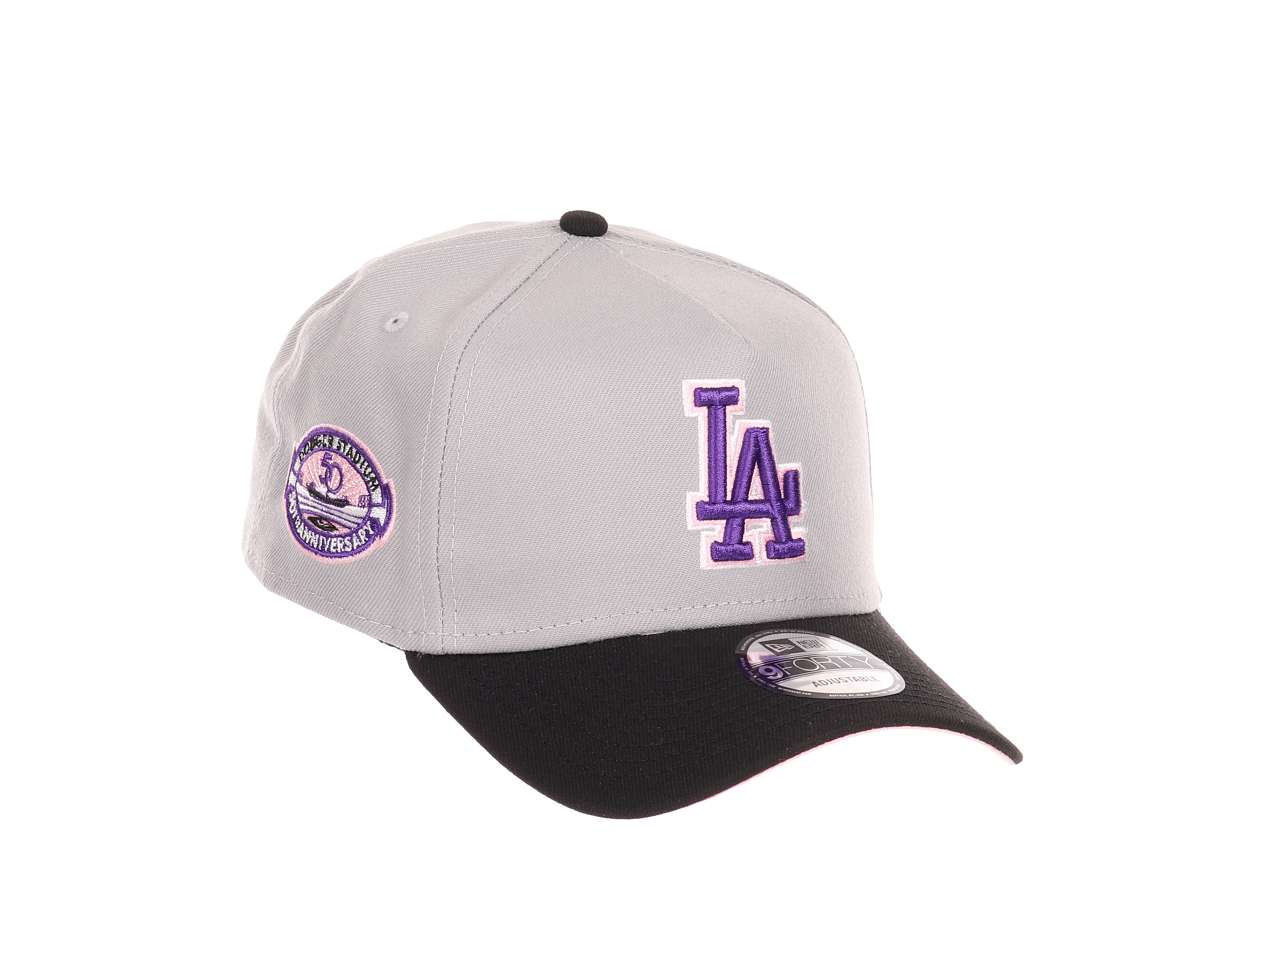 Los Angeles Dodgers MLB  Dogdger Stadium 50th Anniversary Sidepatch Gray Black 9Forty A-Frame Adjustable Cap New Era